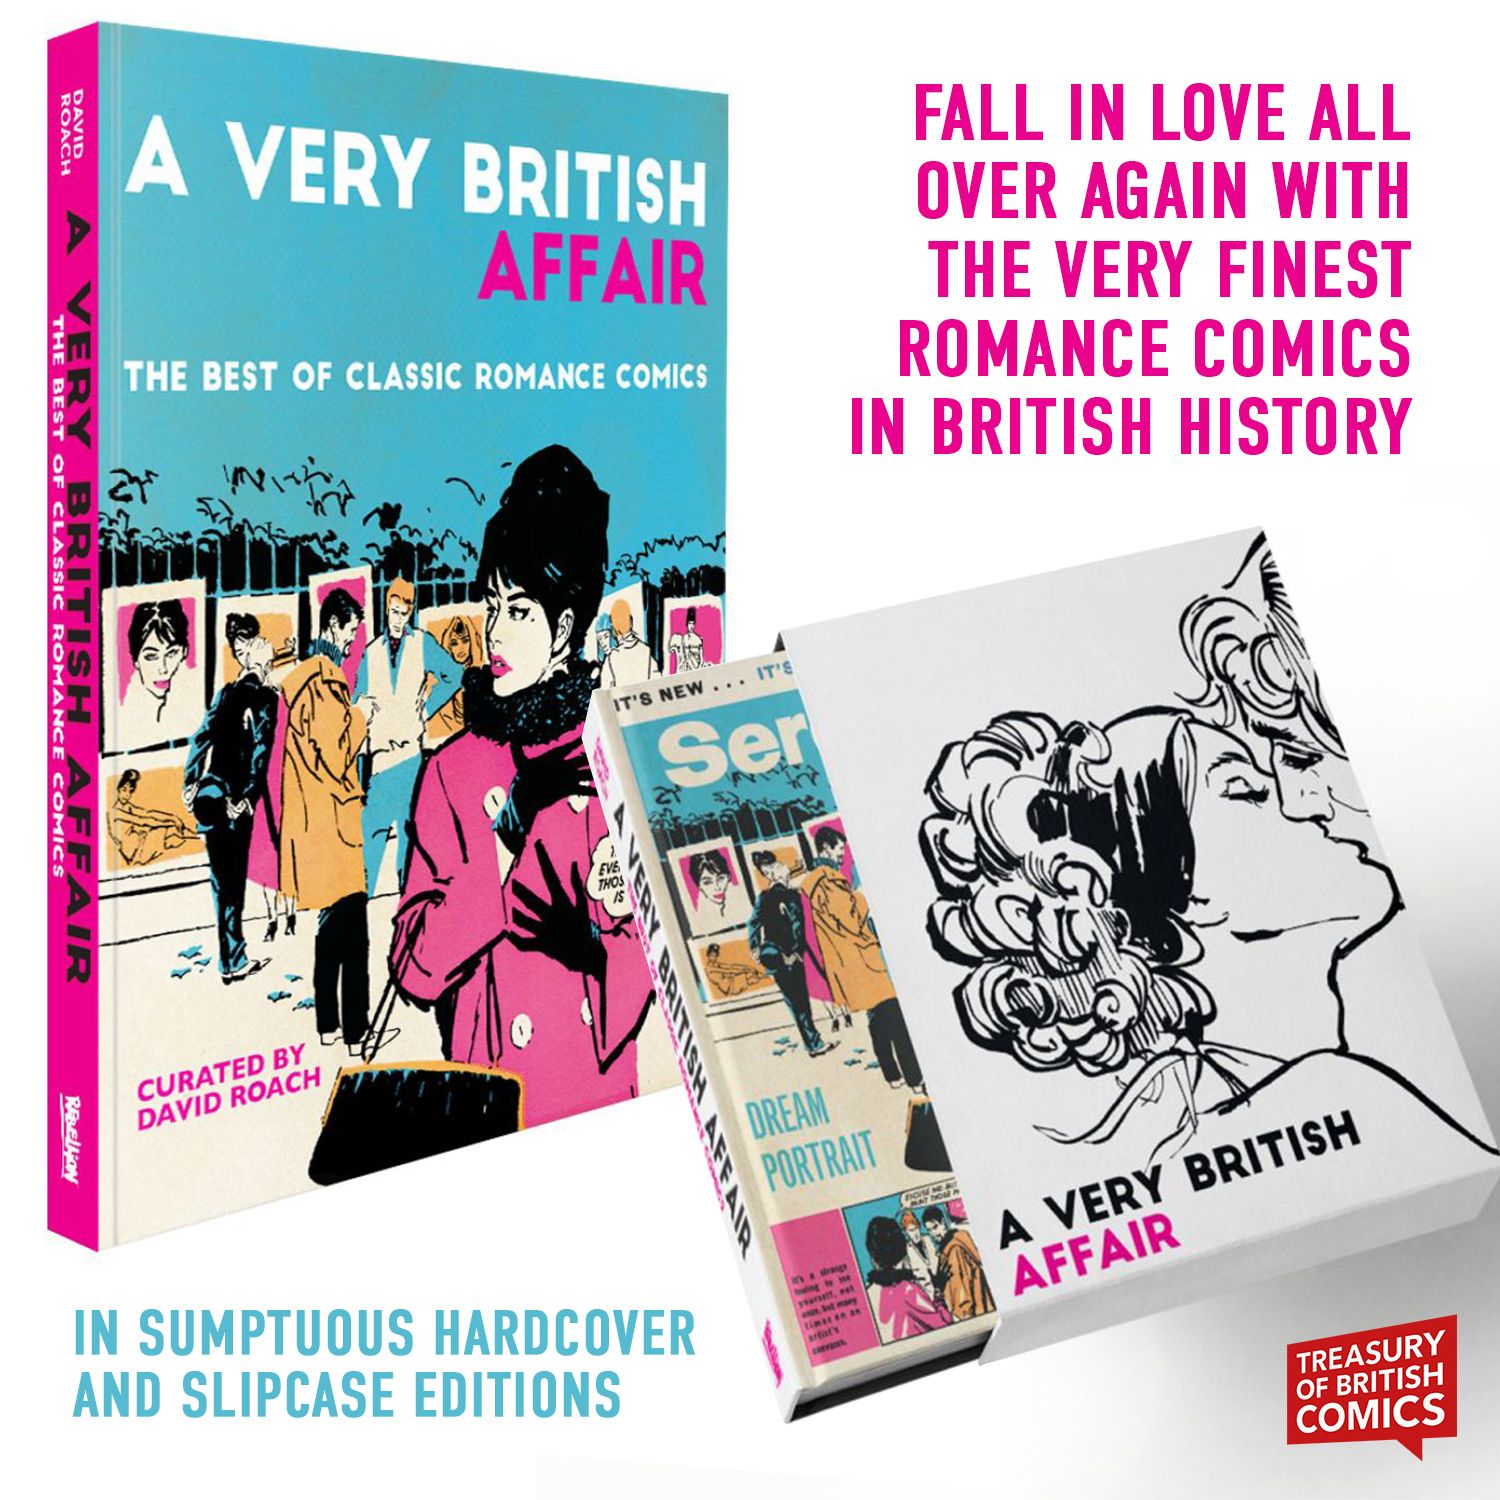 Fall in love again with A Very British Affair – pre-order the collection of Britain’s very finest romance comics